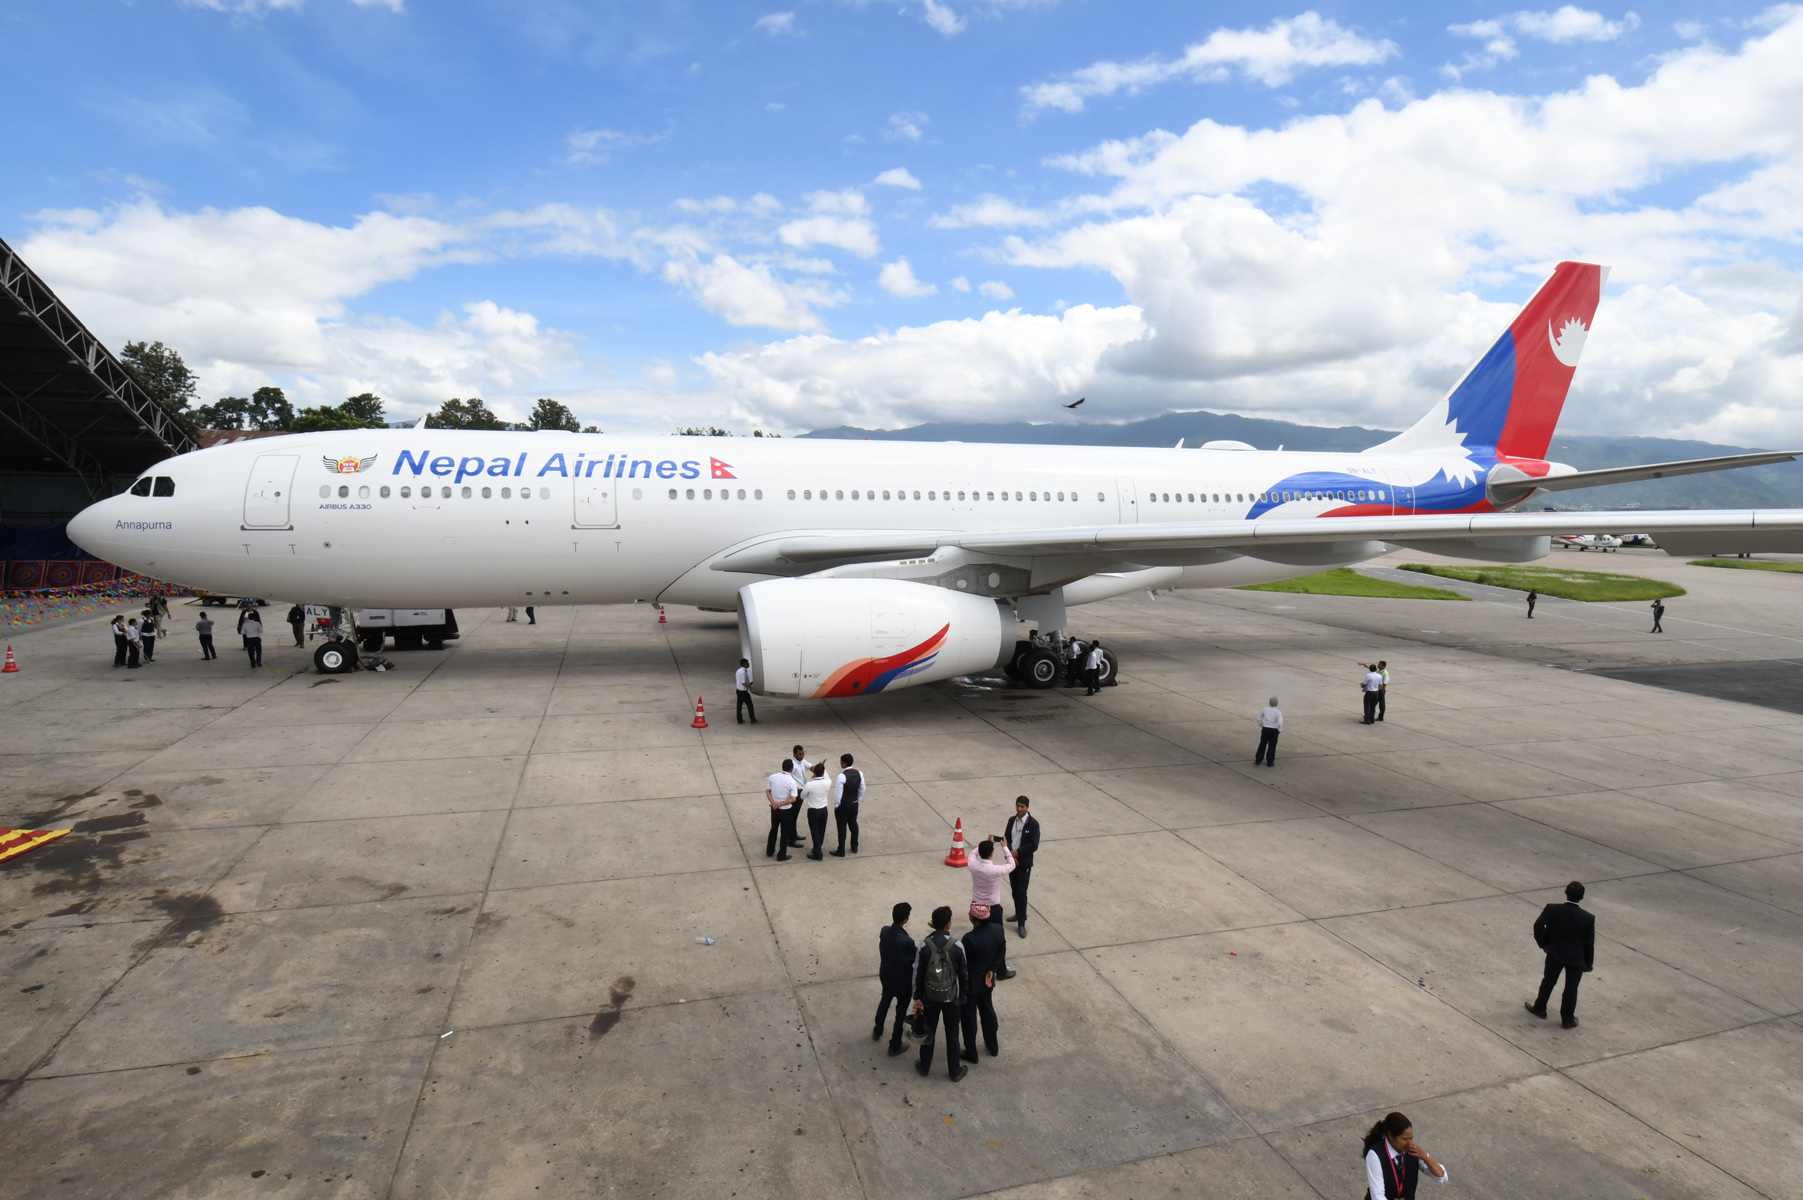 Nepal Airlines Corporation History